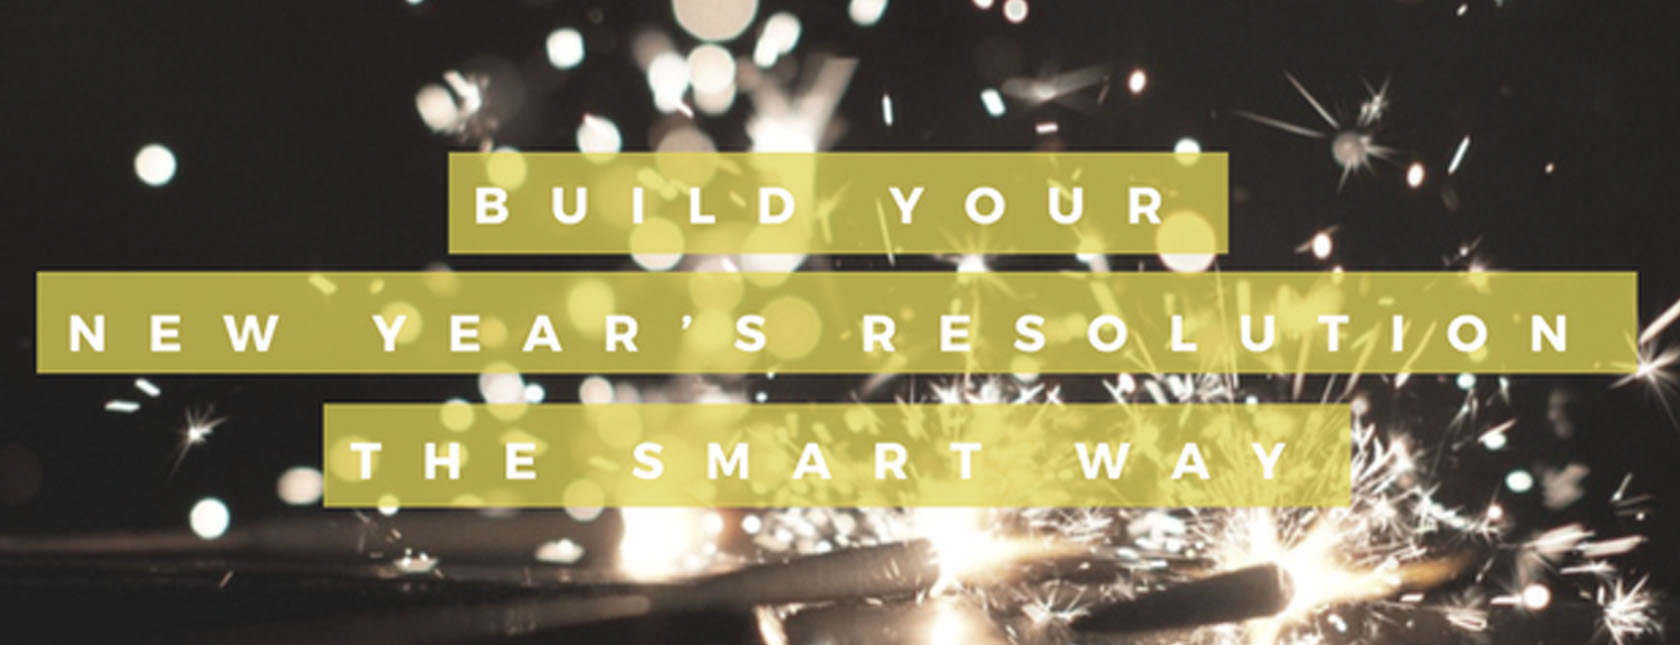 Build Your New Year's Resolutions the SMART way